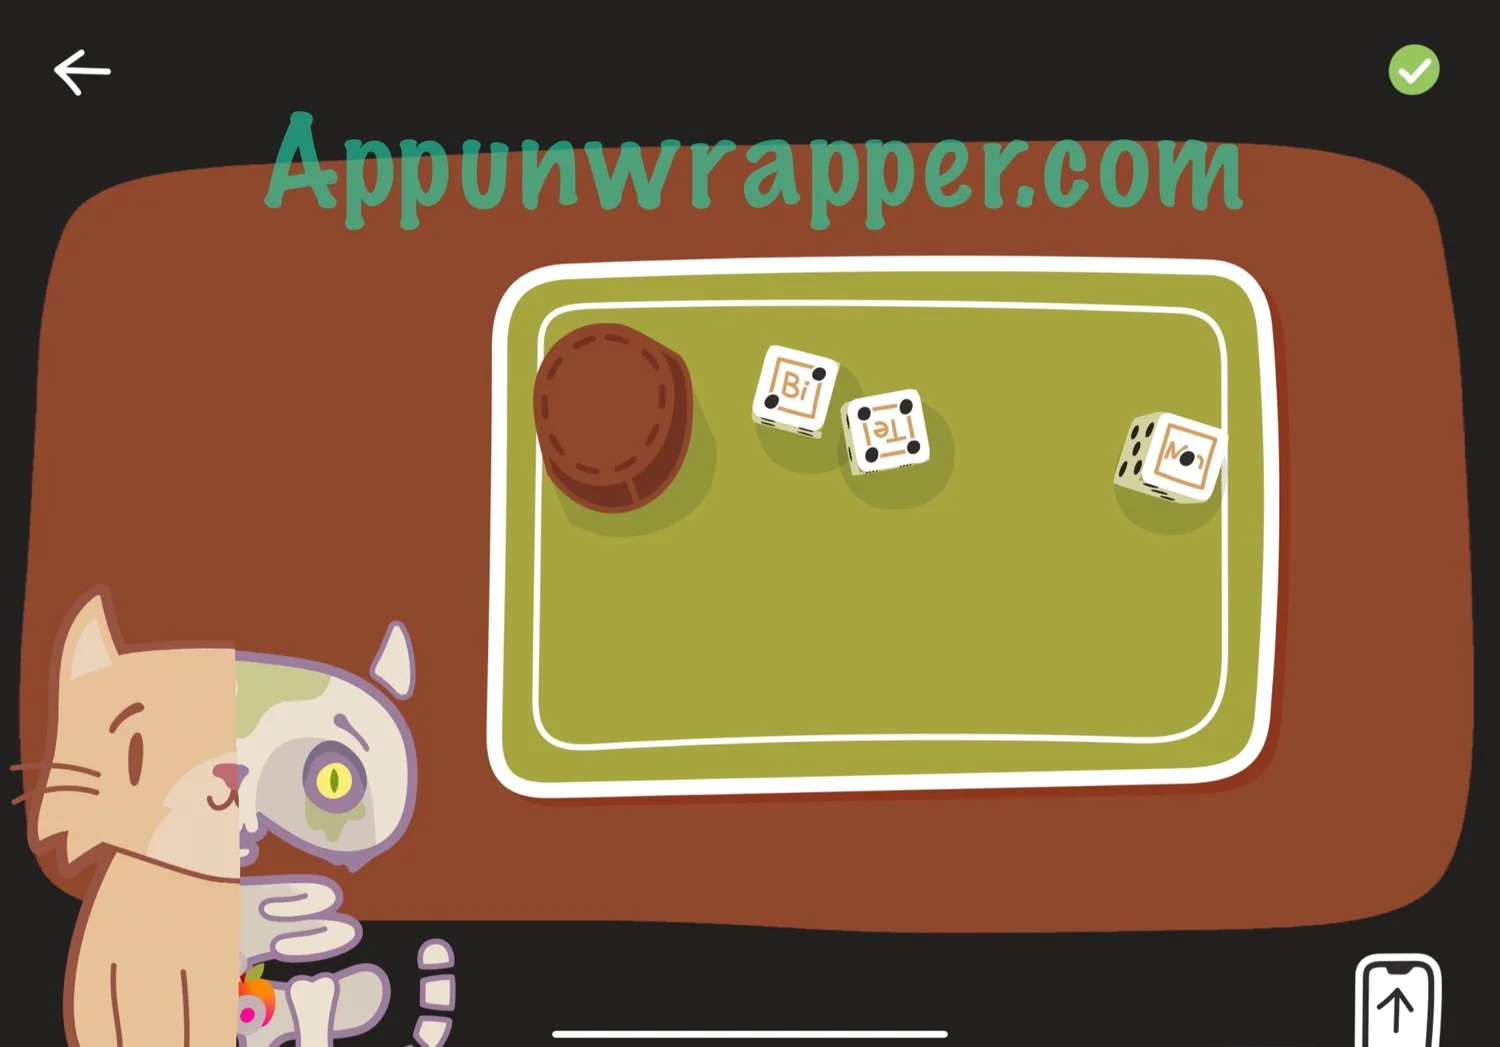 It's rattling in the box! Game app Kitty Q